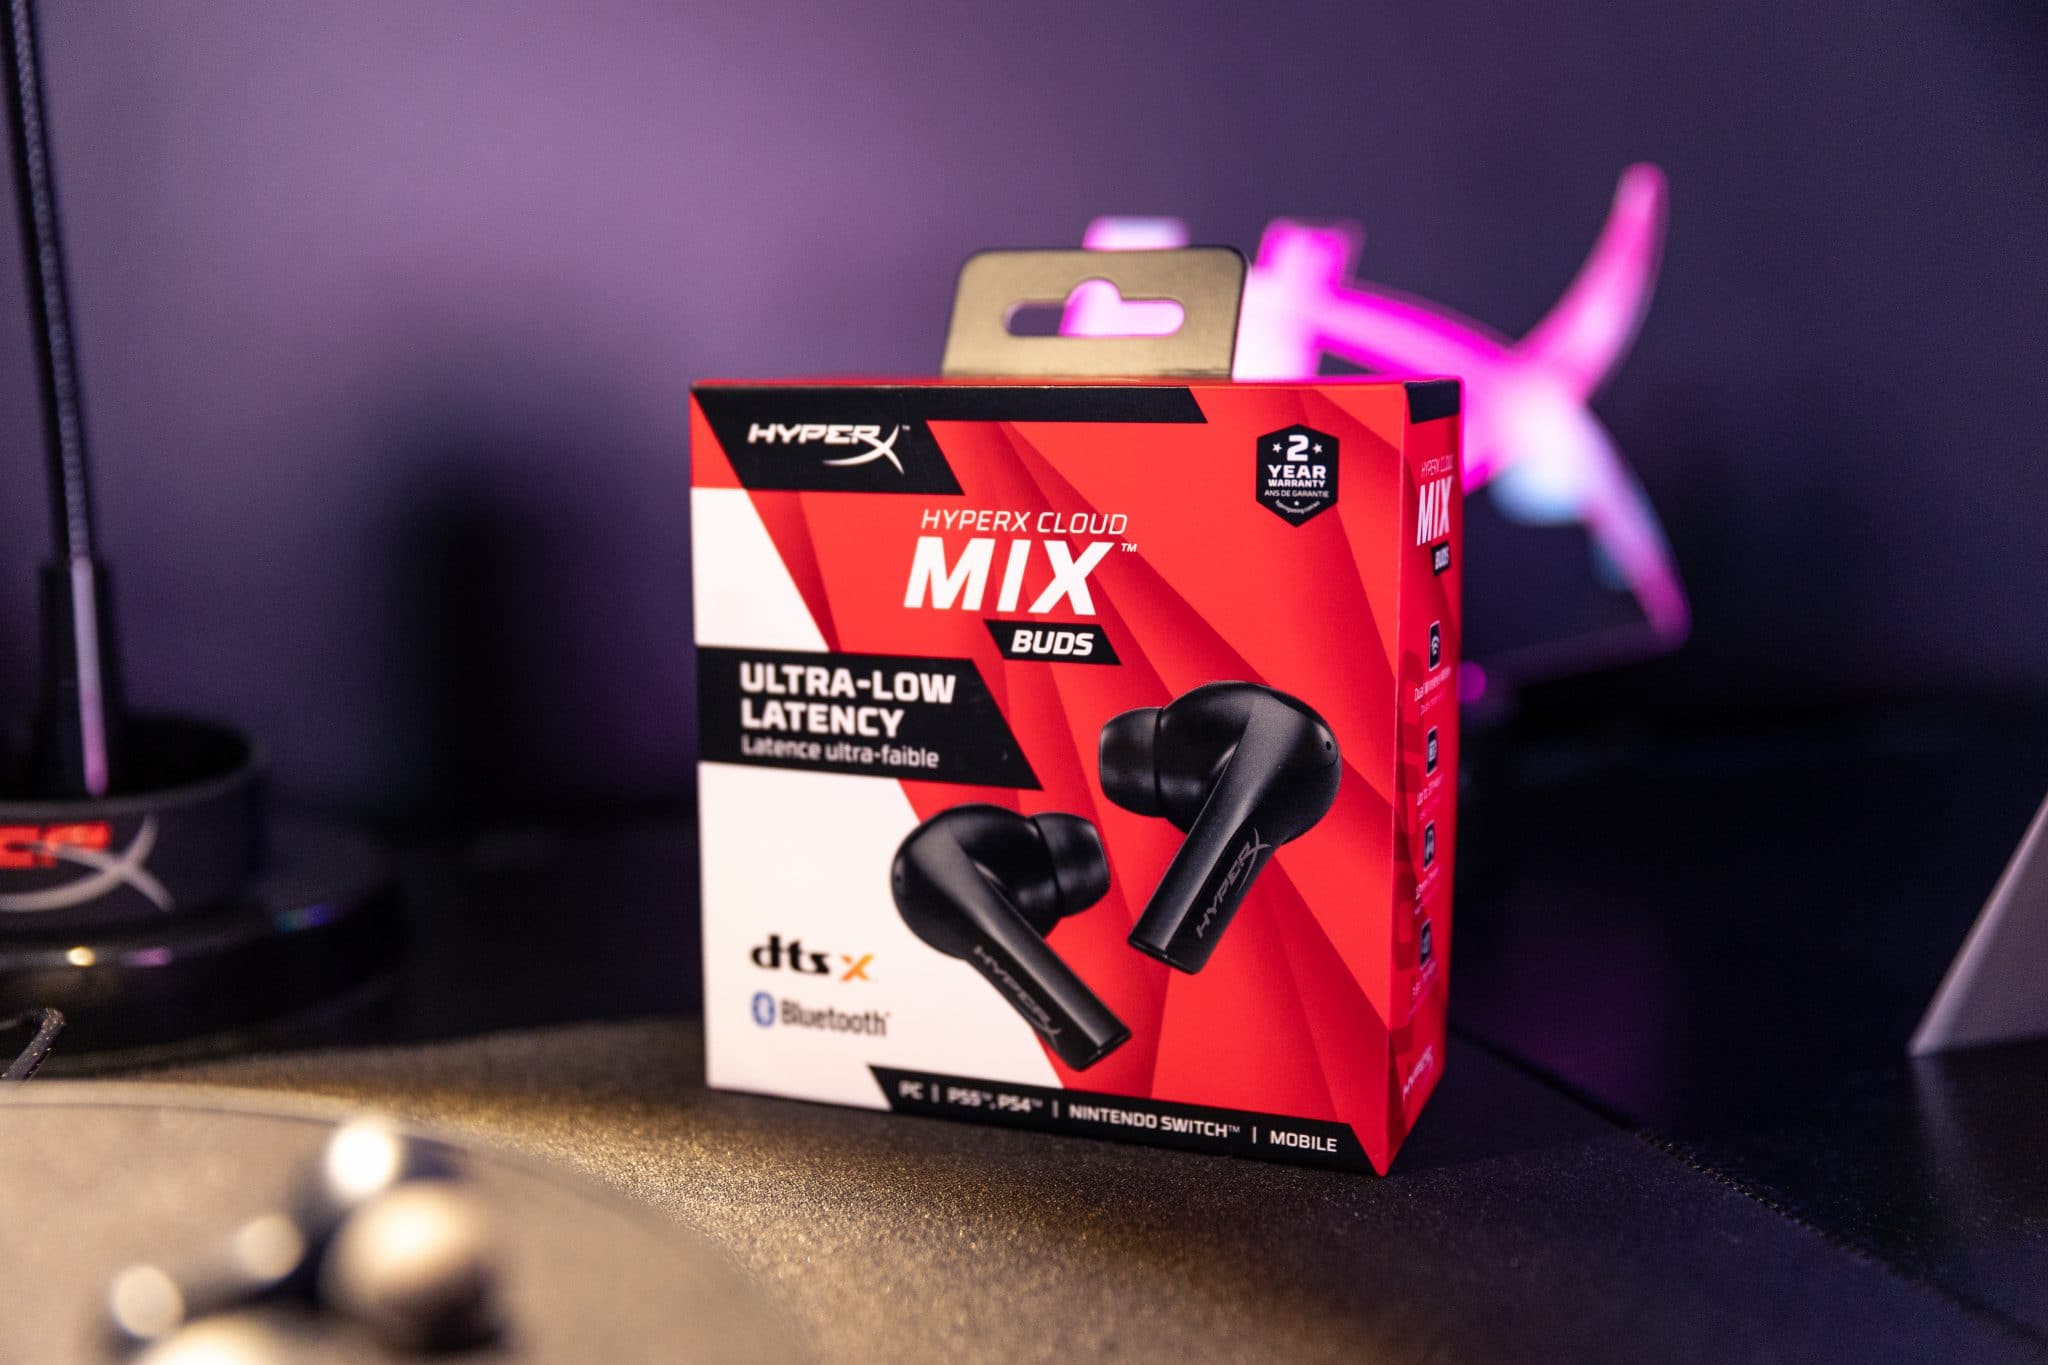 Announcement Mix & HyperX A World Options Noisy Dual-Connection - True Wireless, - Of Buds Pixel